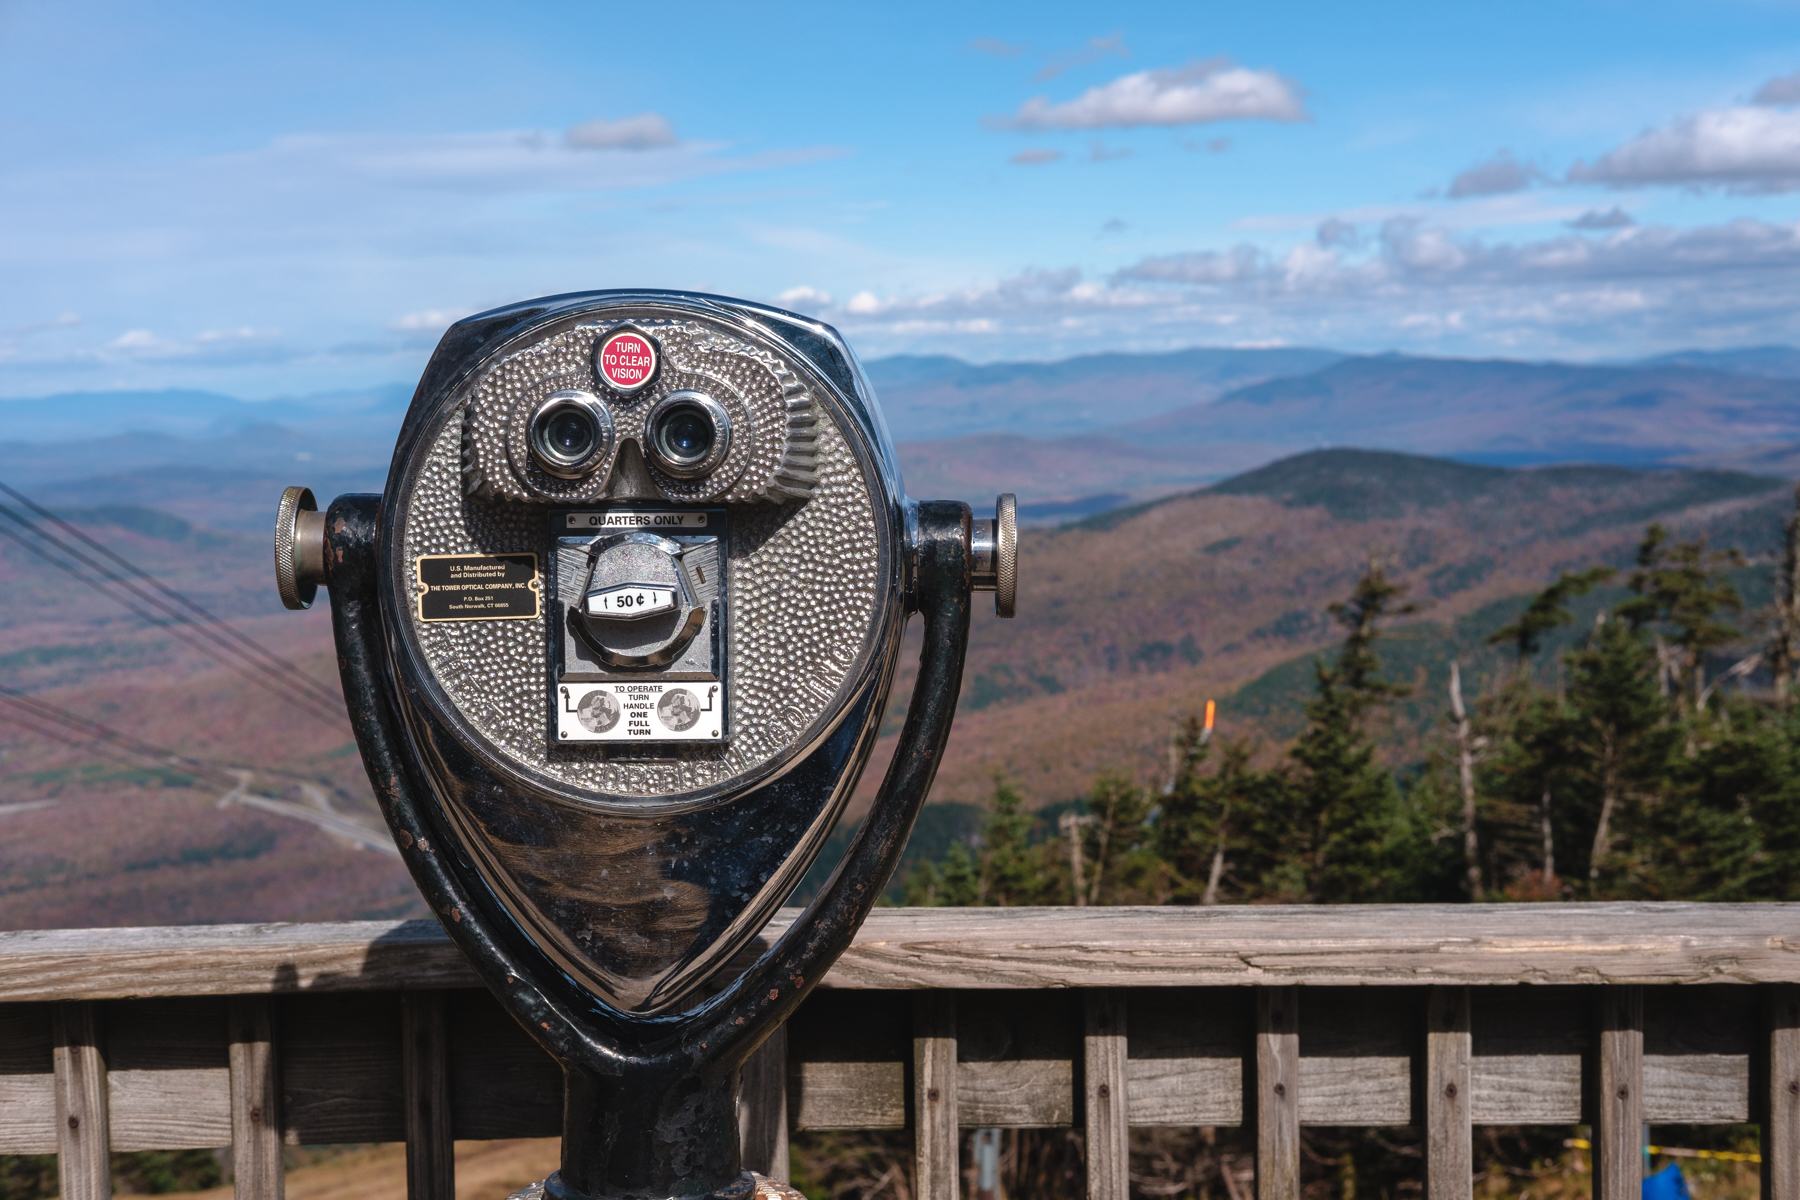 Tower viewer coin-operated binoculars on an overlook deck with expansive mountainous landscape in the background under a blue sky with clouds.